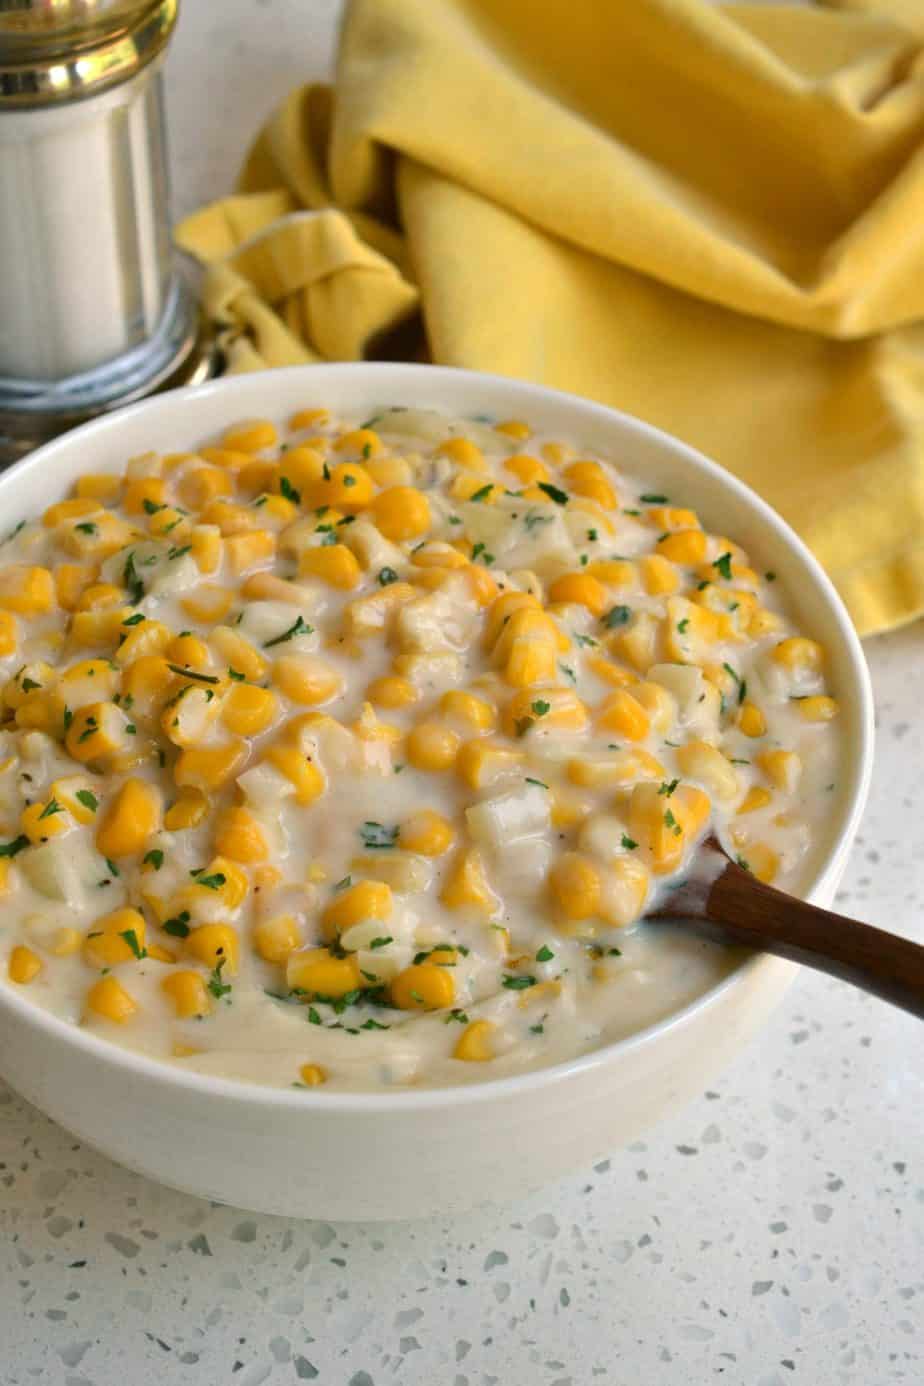 Creamed Corn is comfort food at its best. Serve along with beef tips or chicken